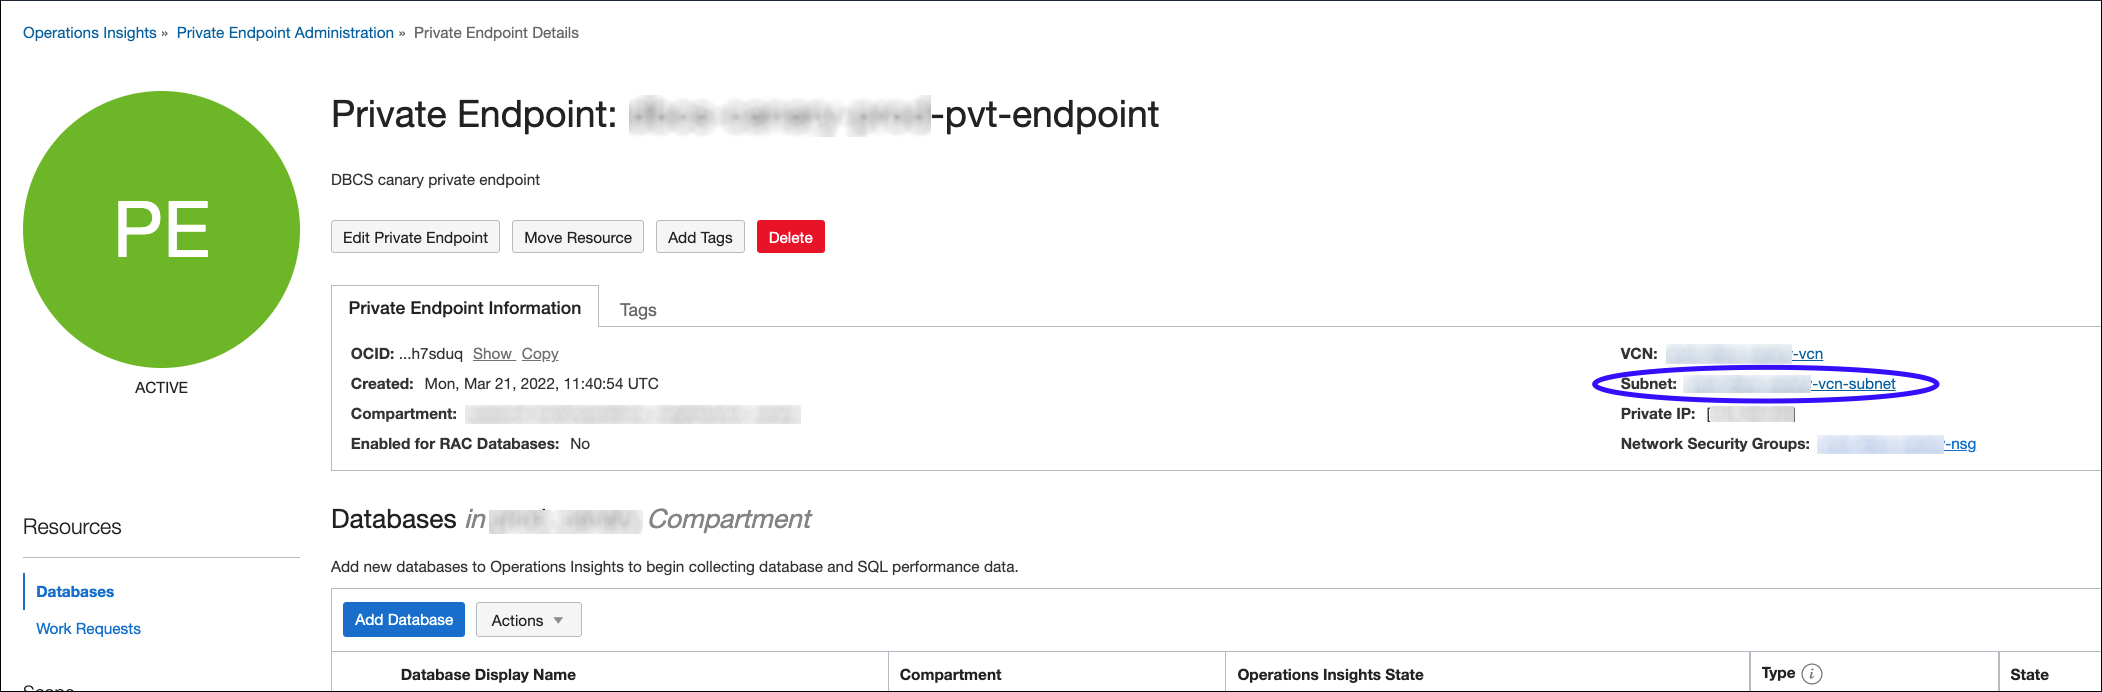 Graphic shows the the VCN/Subnet page link from the Private Endpoint Details page.